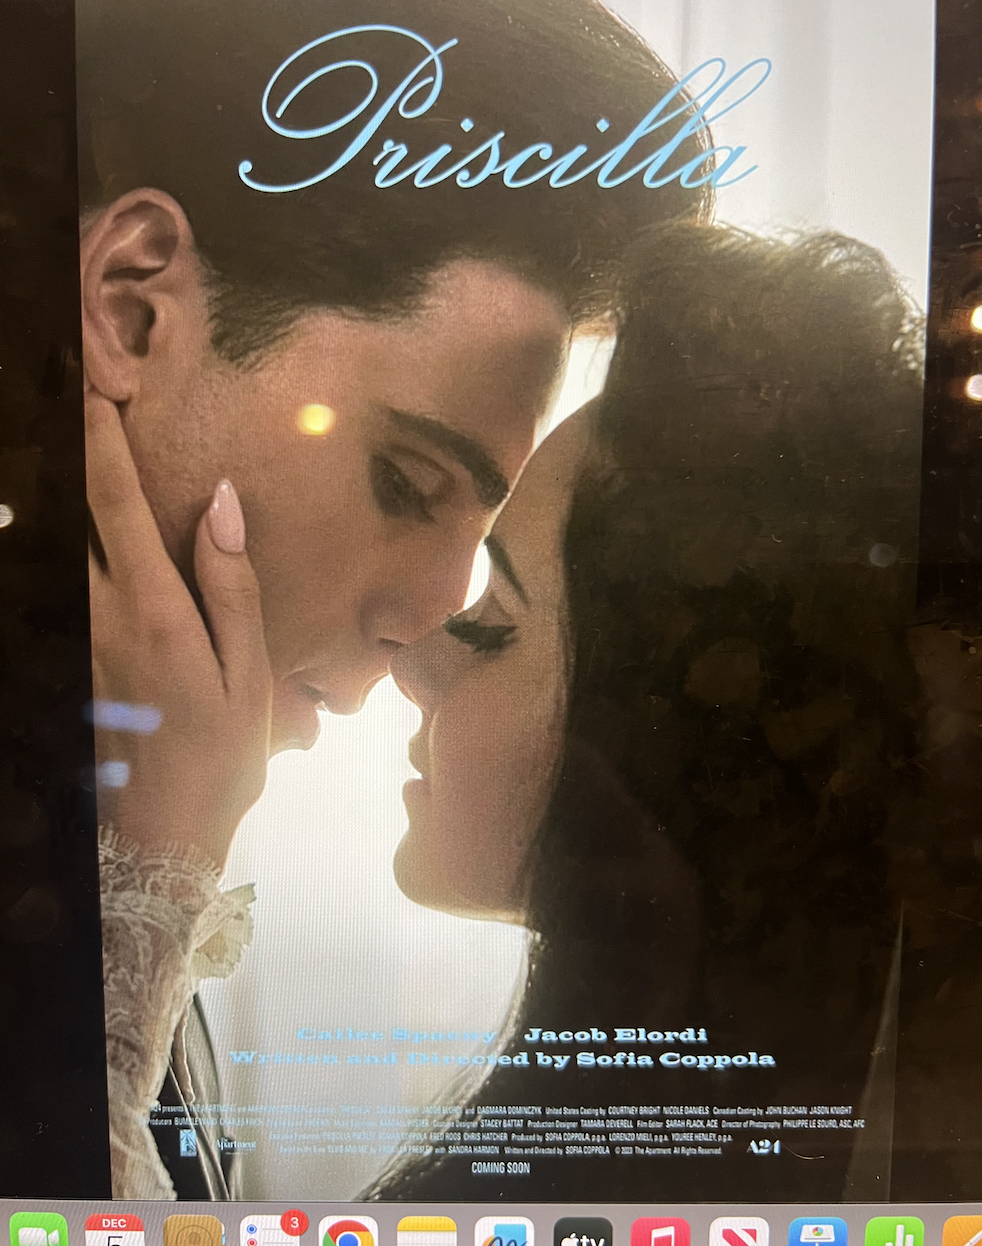 The poster for Priscilla starring Jacob Elordi and Cailee Spaeny